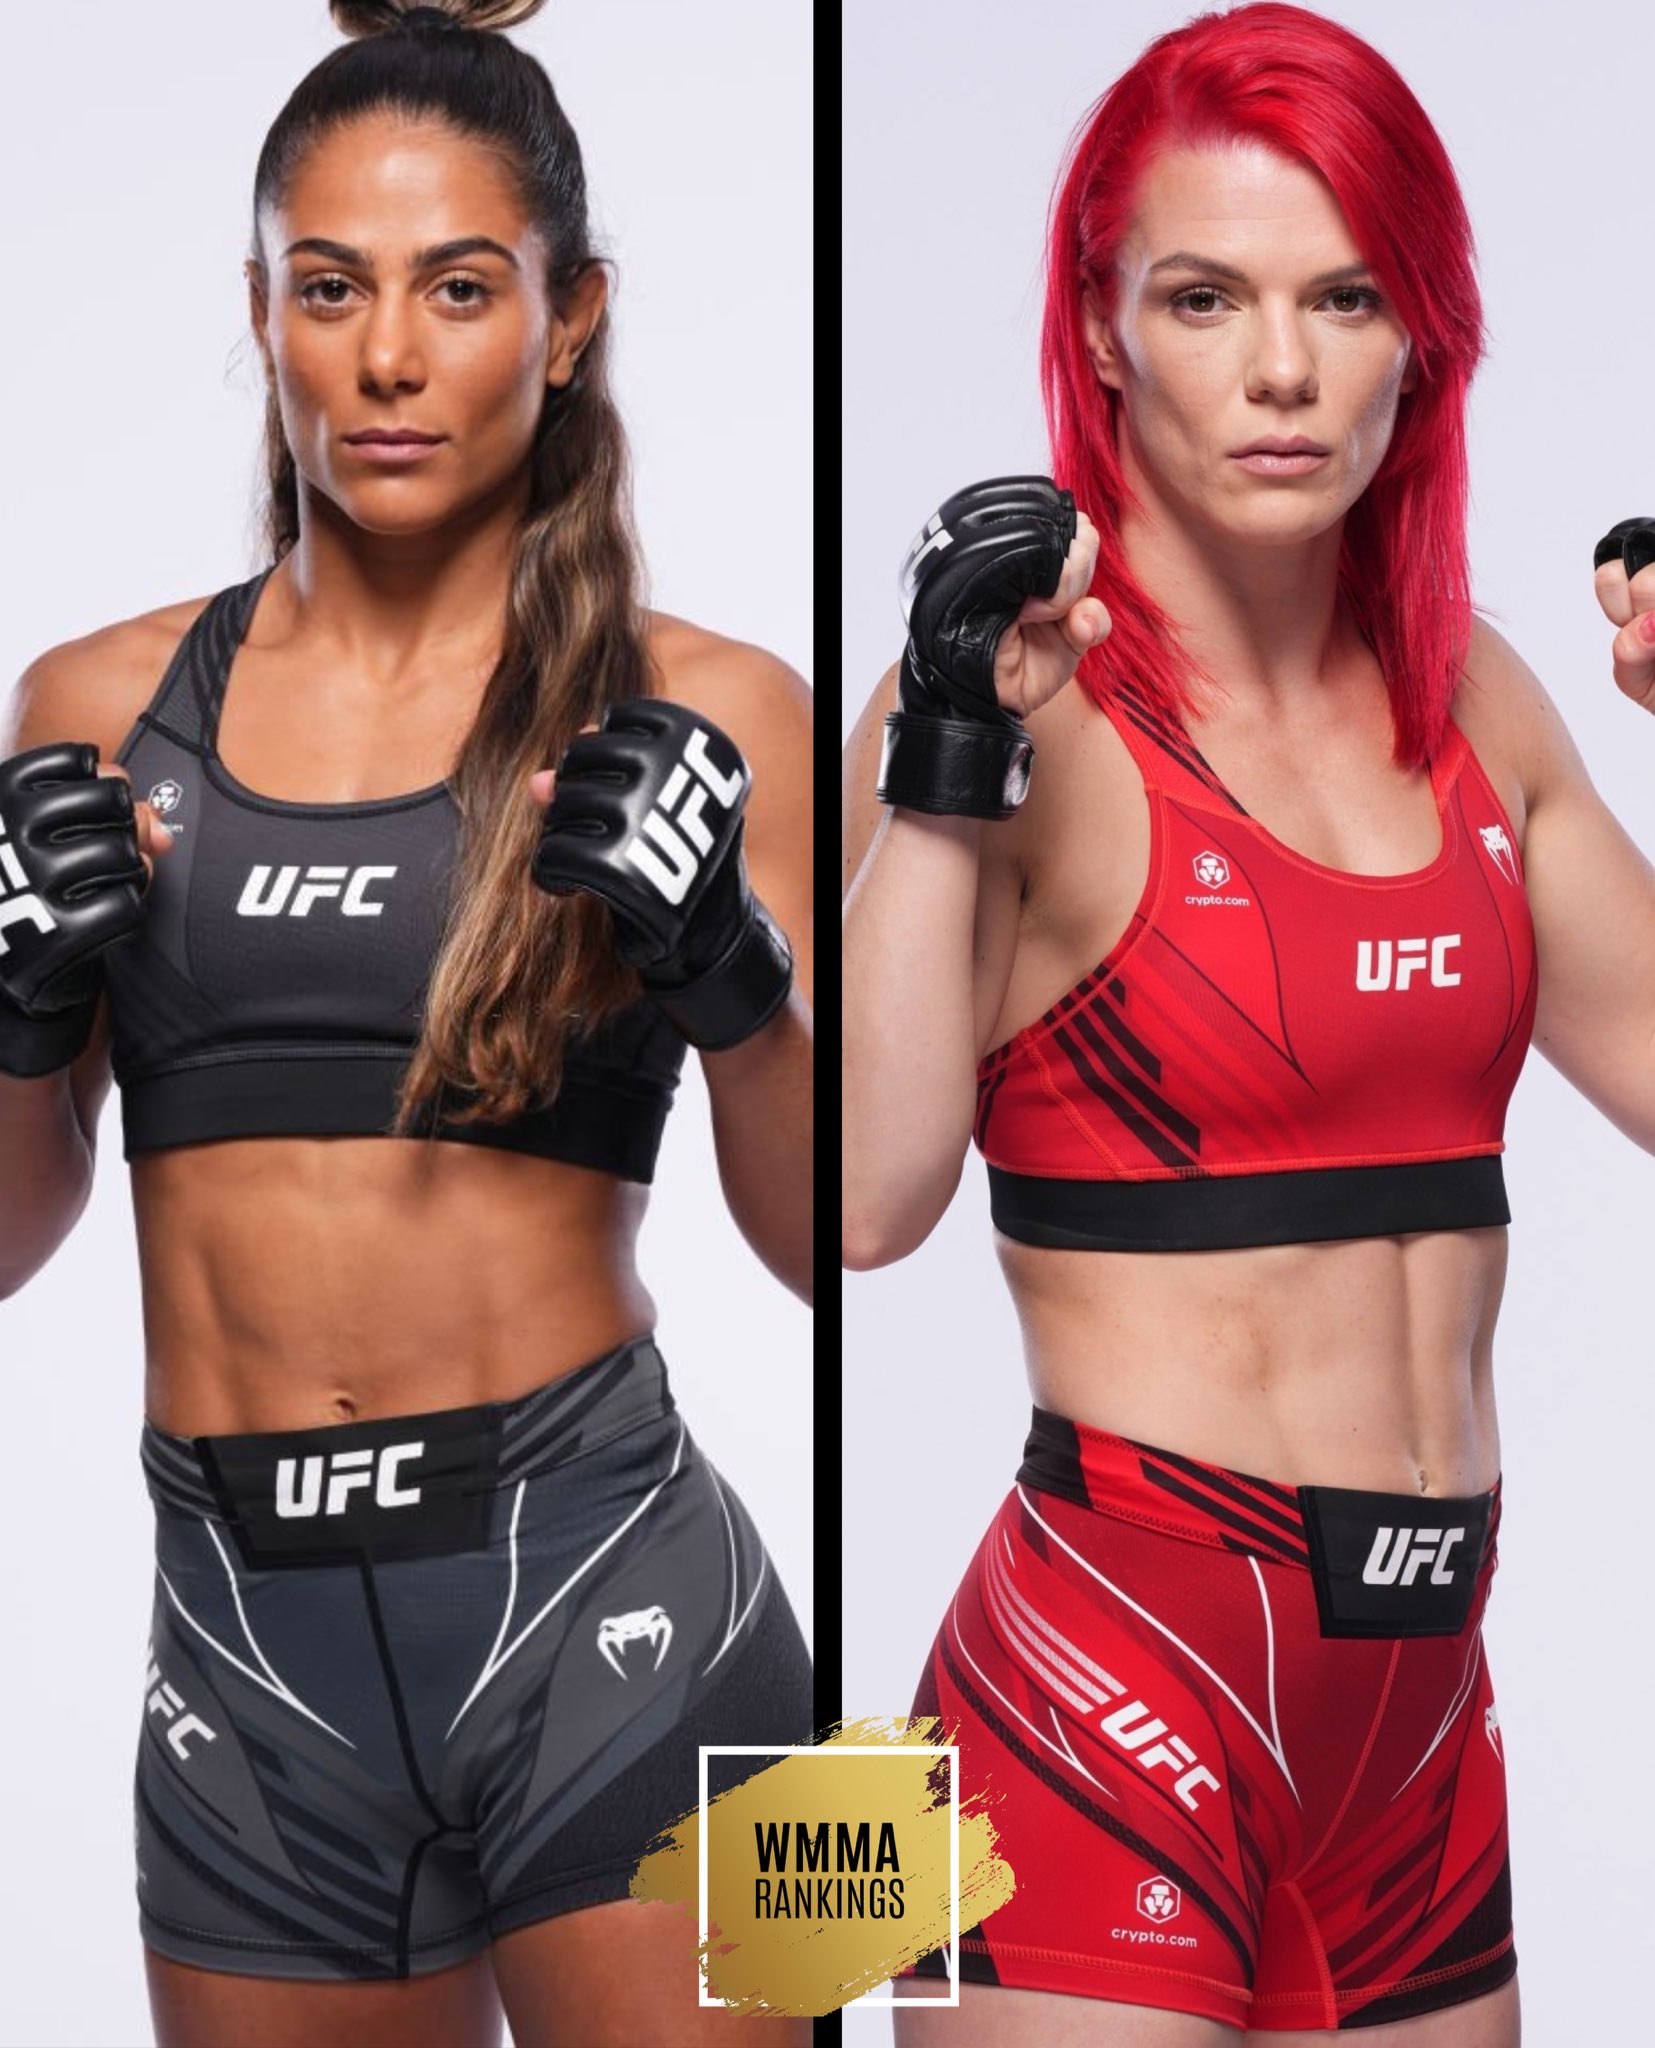 Women's MMA Rankings on X: 🔥 THIS SATURDAY, witness a strawweight storm  on the #UFCJacksonville prelims! “Baby Shark Tabatha Ricci 🦈 vs Savage  Gillian Robertson 🐯. Who's your pick to win? Find